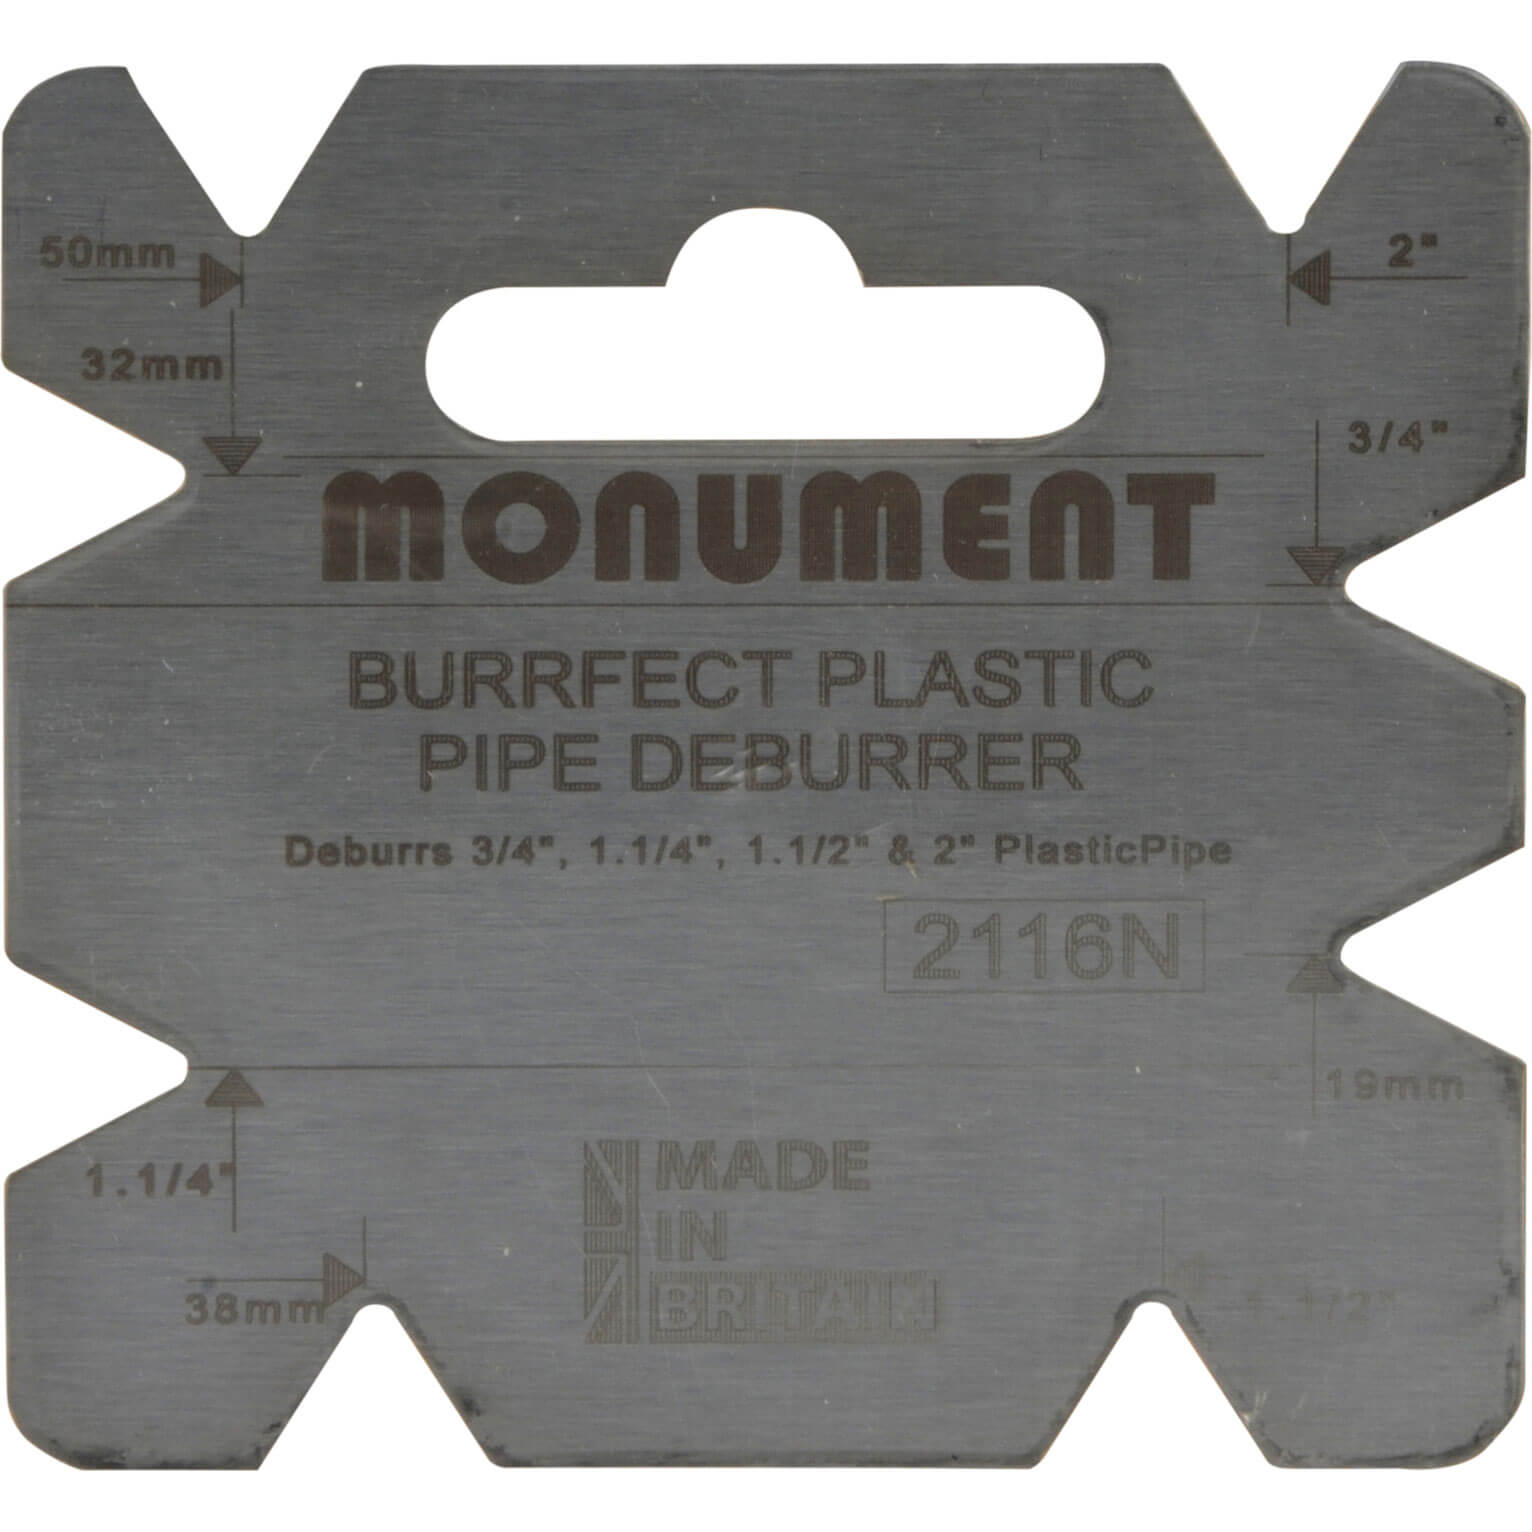 Photo of Monument 2116n Burrfect Pipe Deburrer